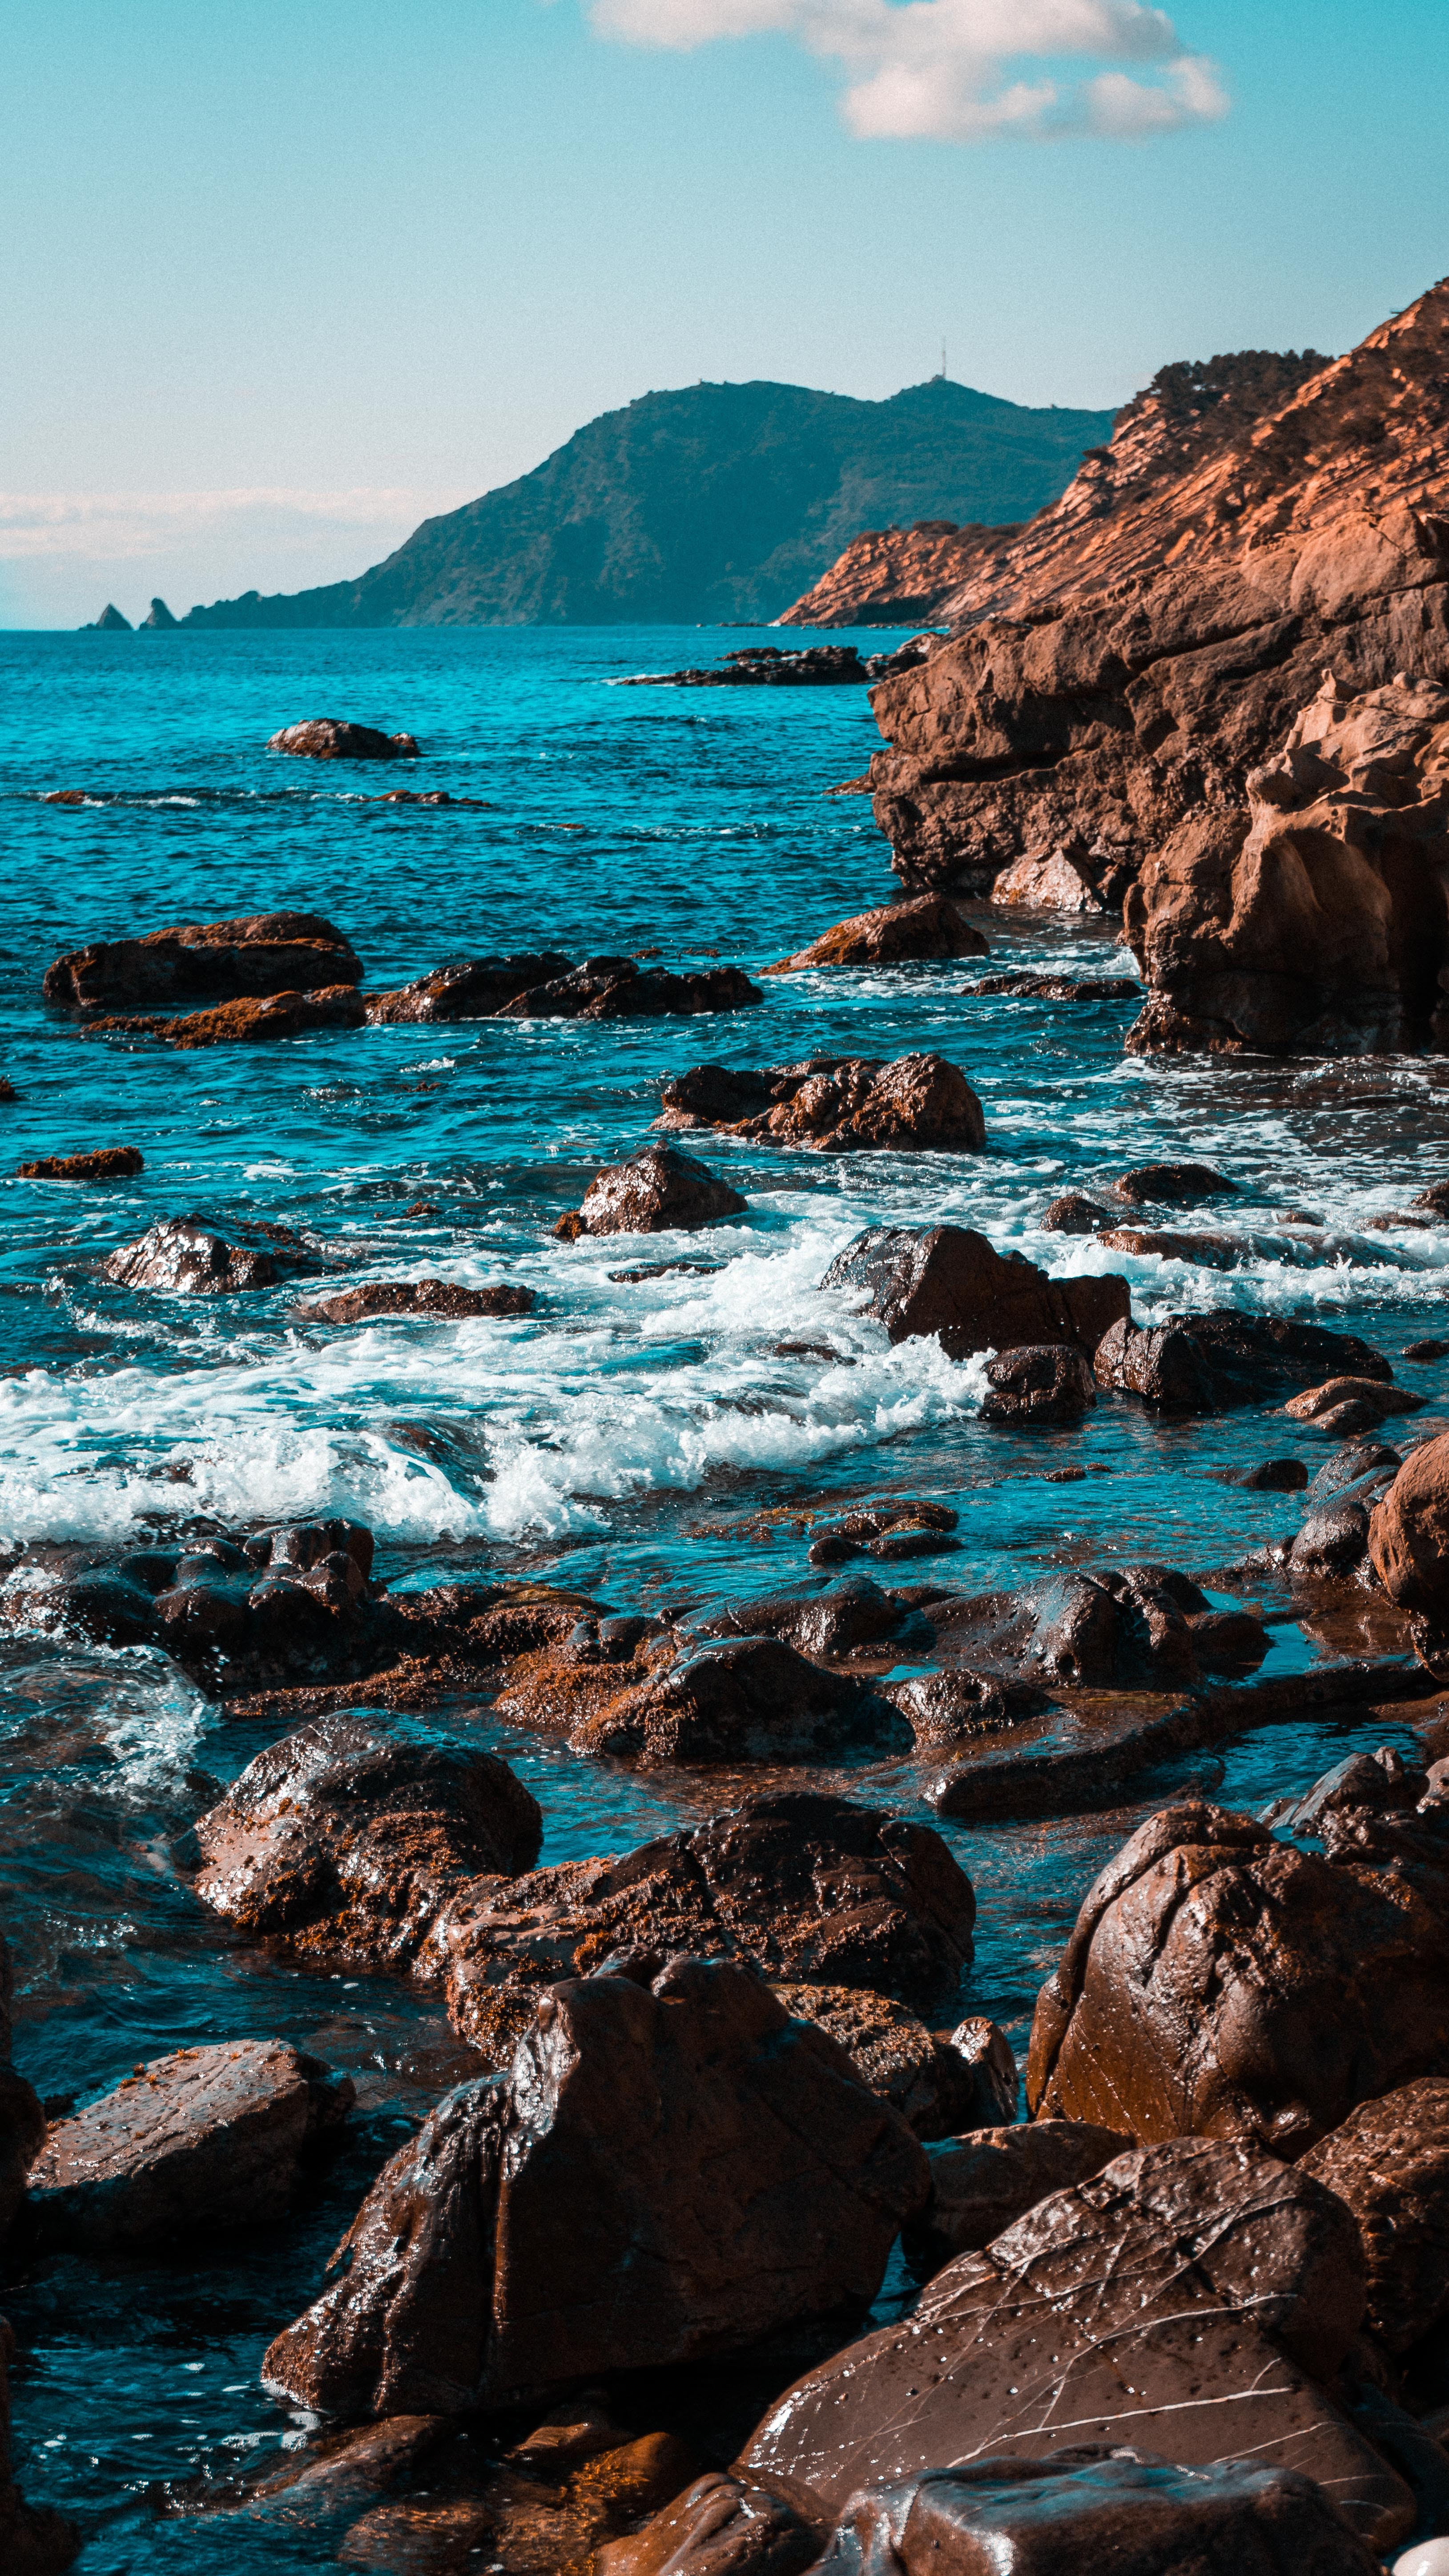 waves, surf, mountains, rocks, nature lock screen backgrounds